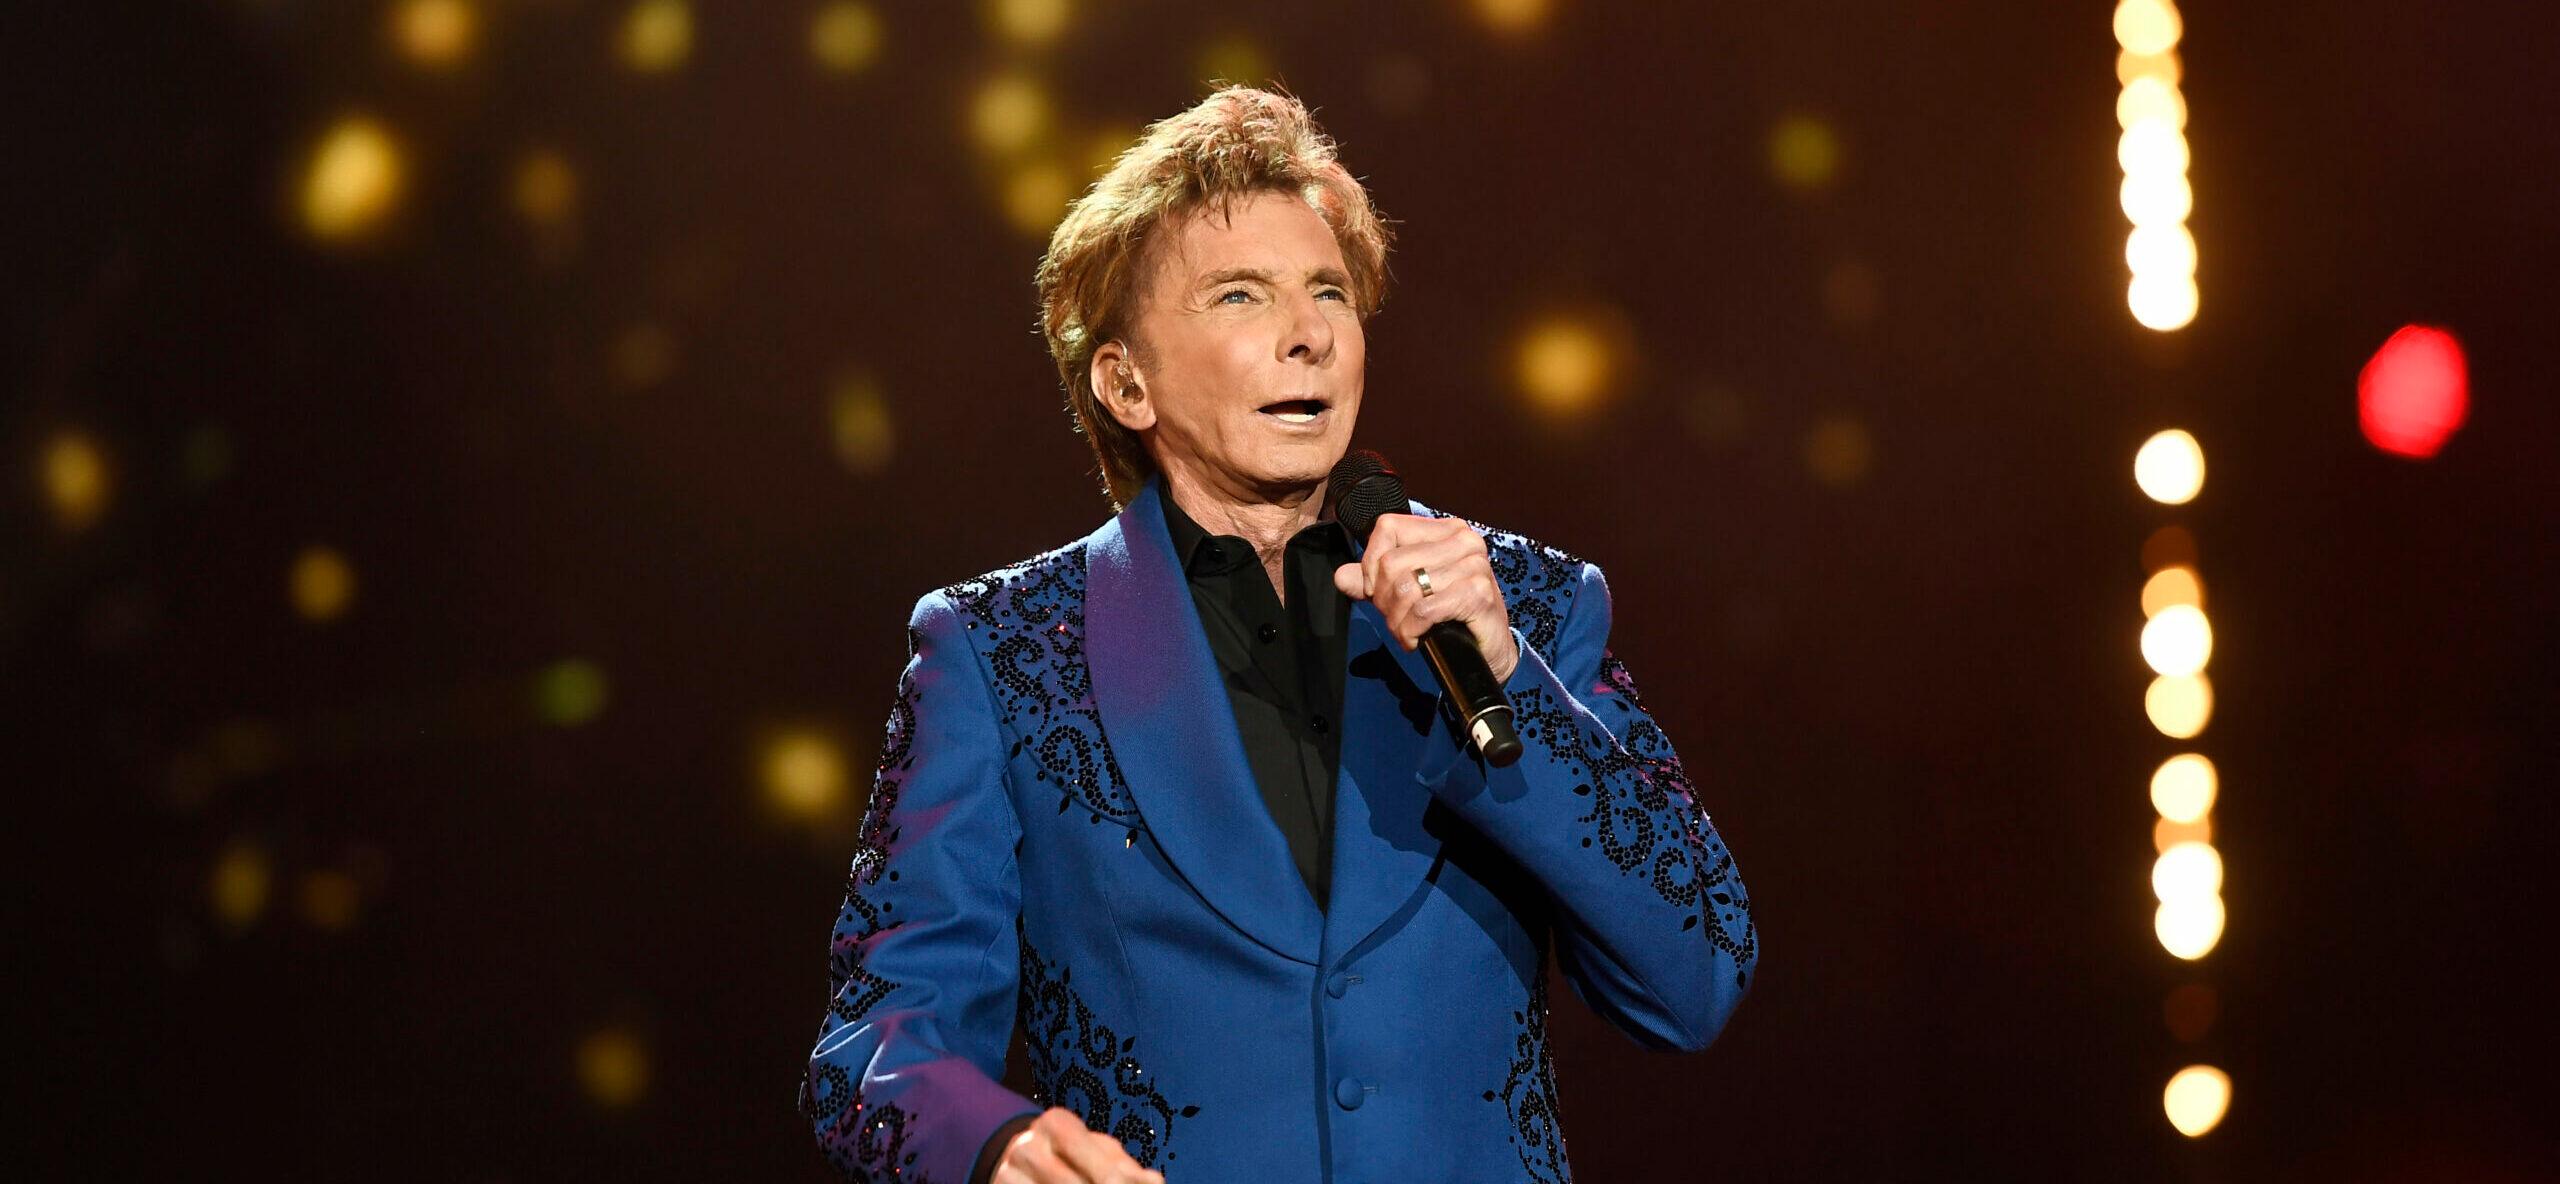 Barry Manilow performing at Proms In The Park 2019